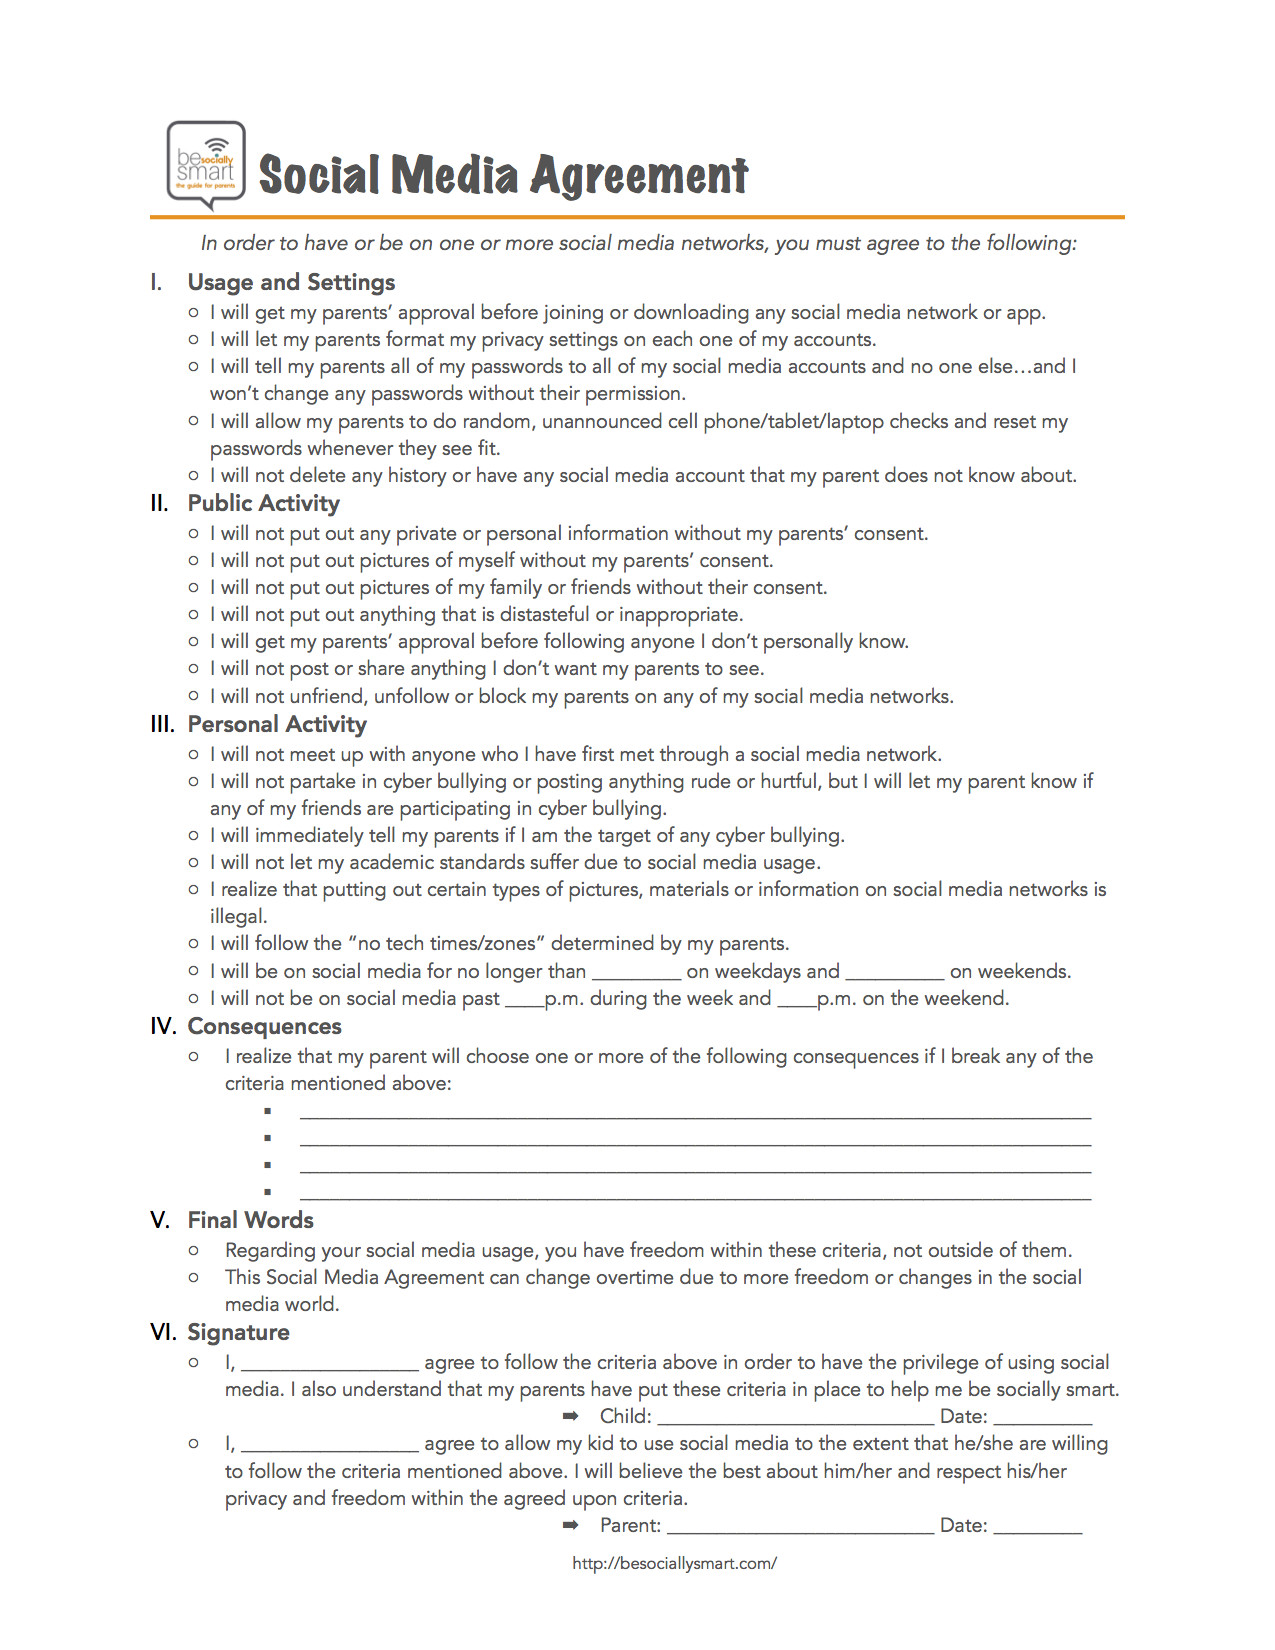 Parent Child social media contract and agreement for phones